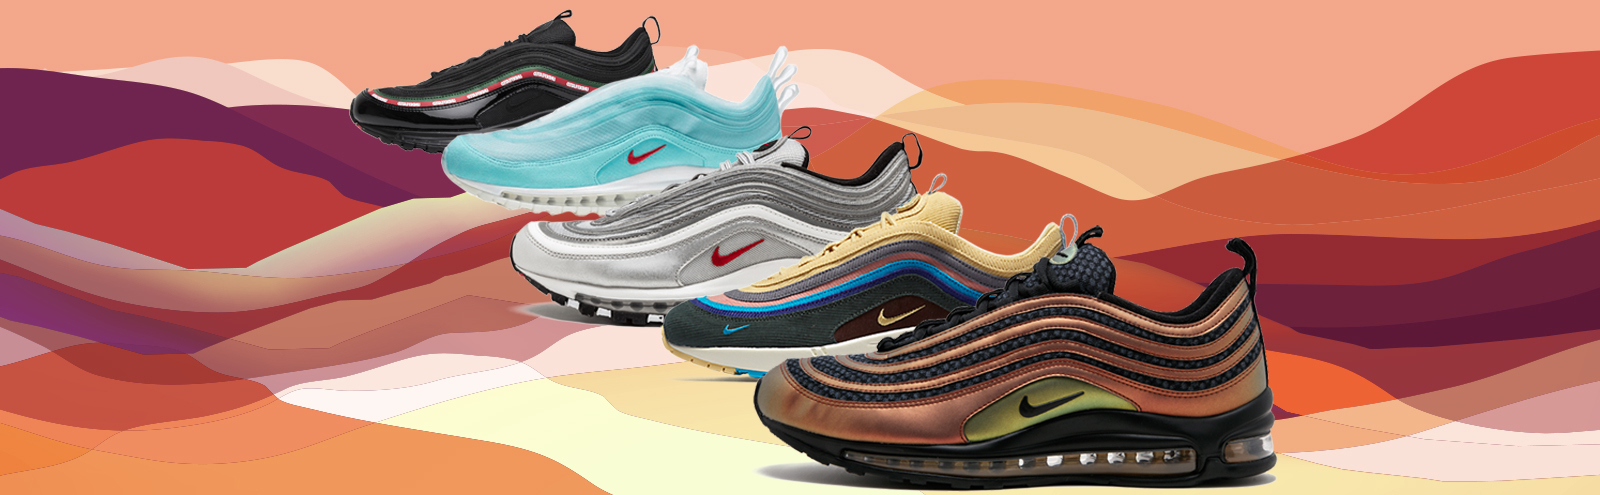 Ranking All of Union's Nike Collaborations, From Worst to Best